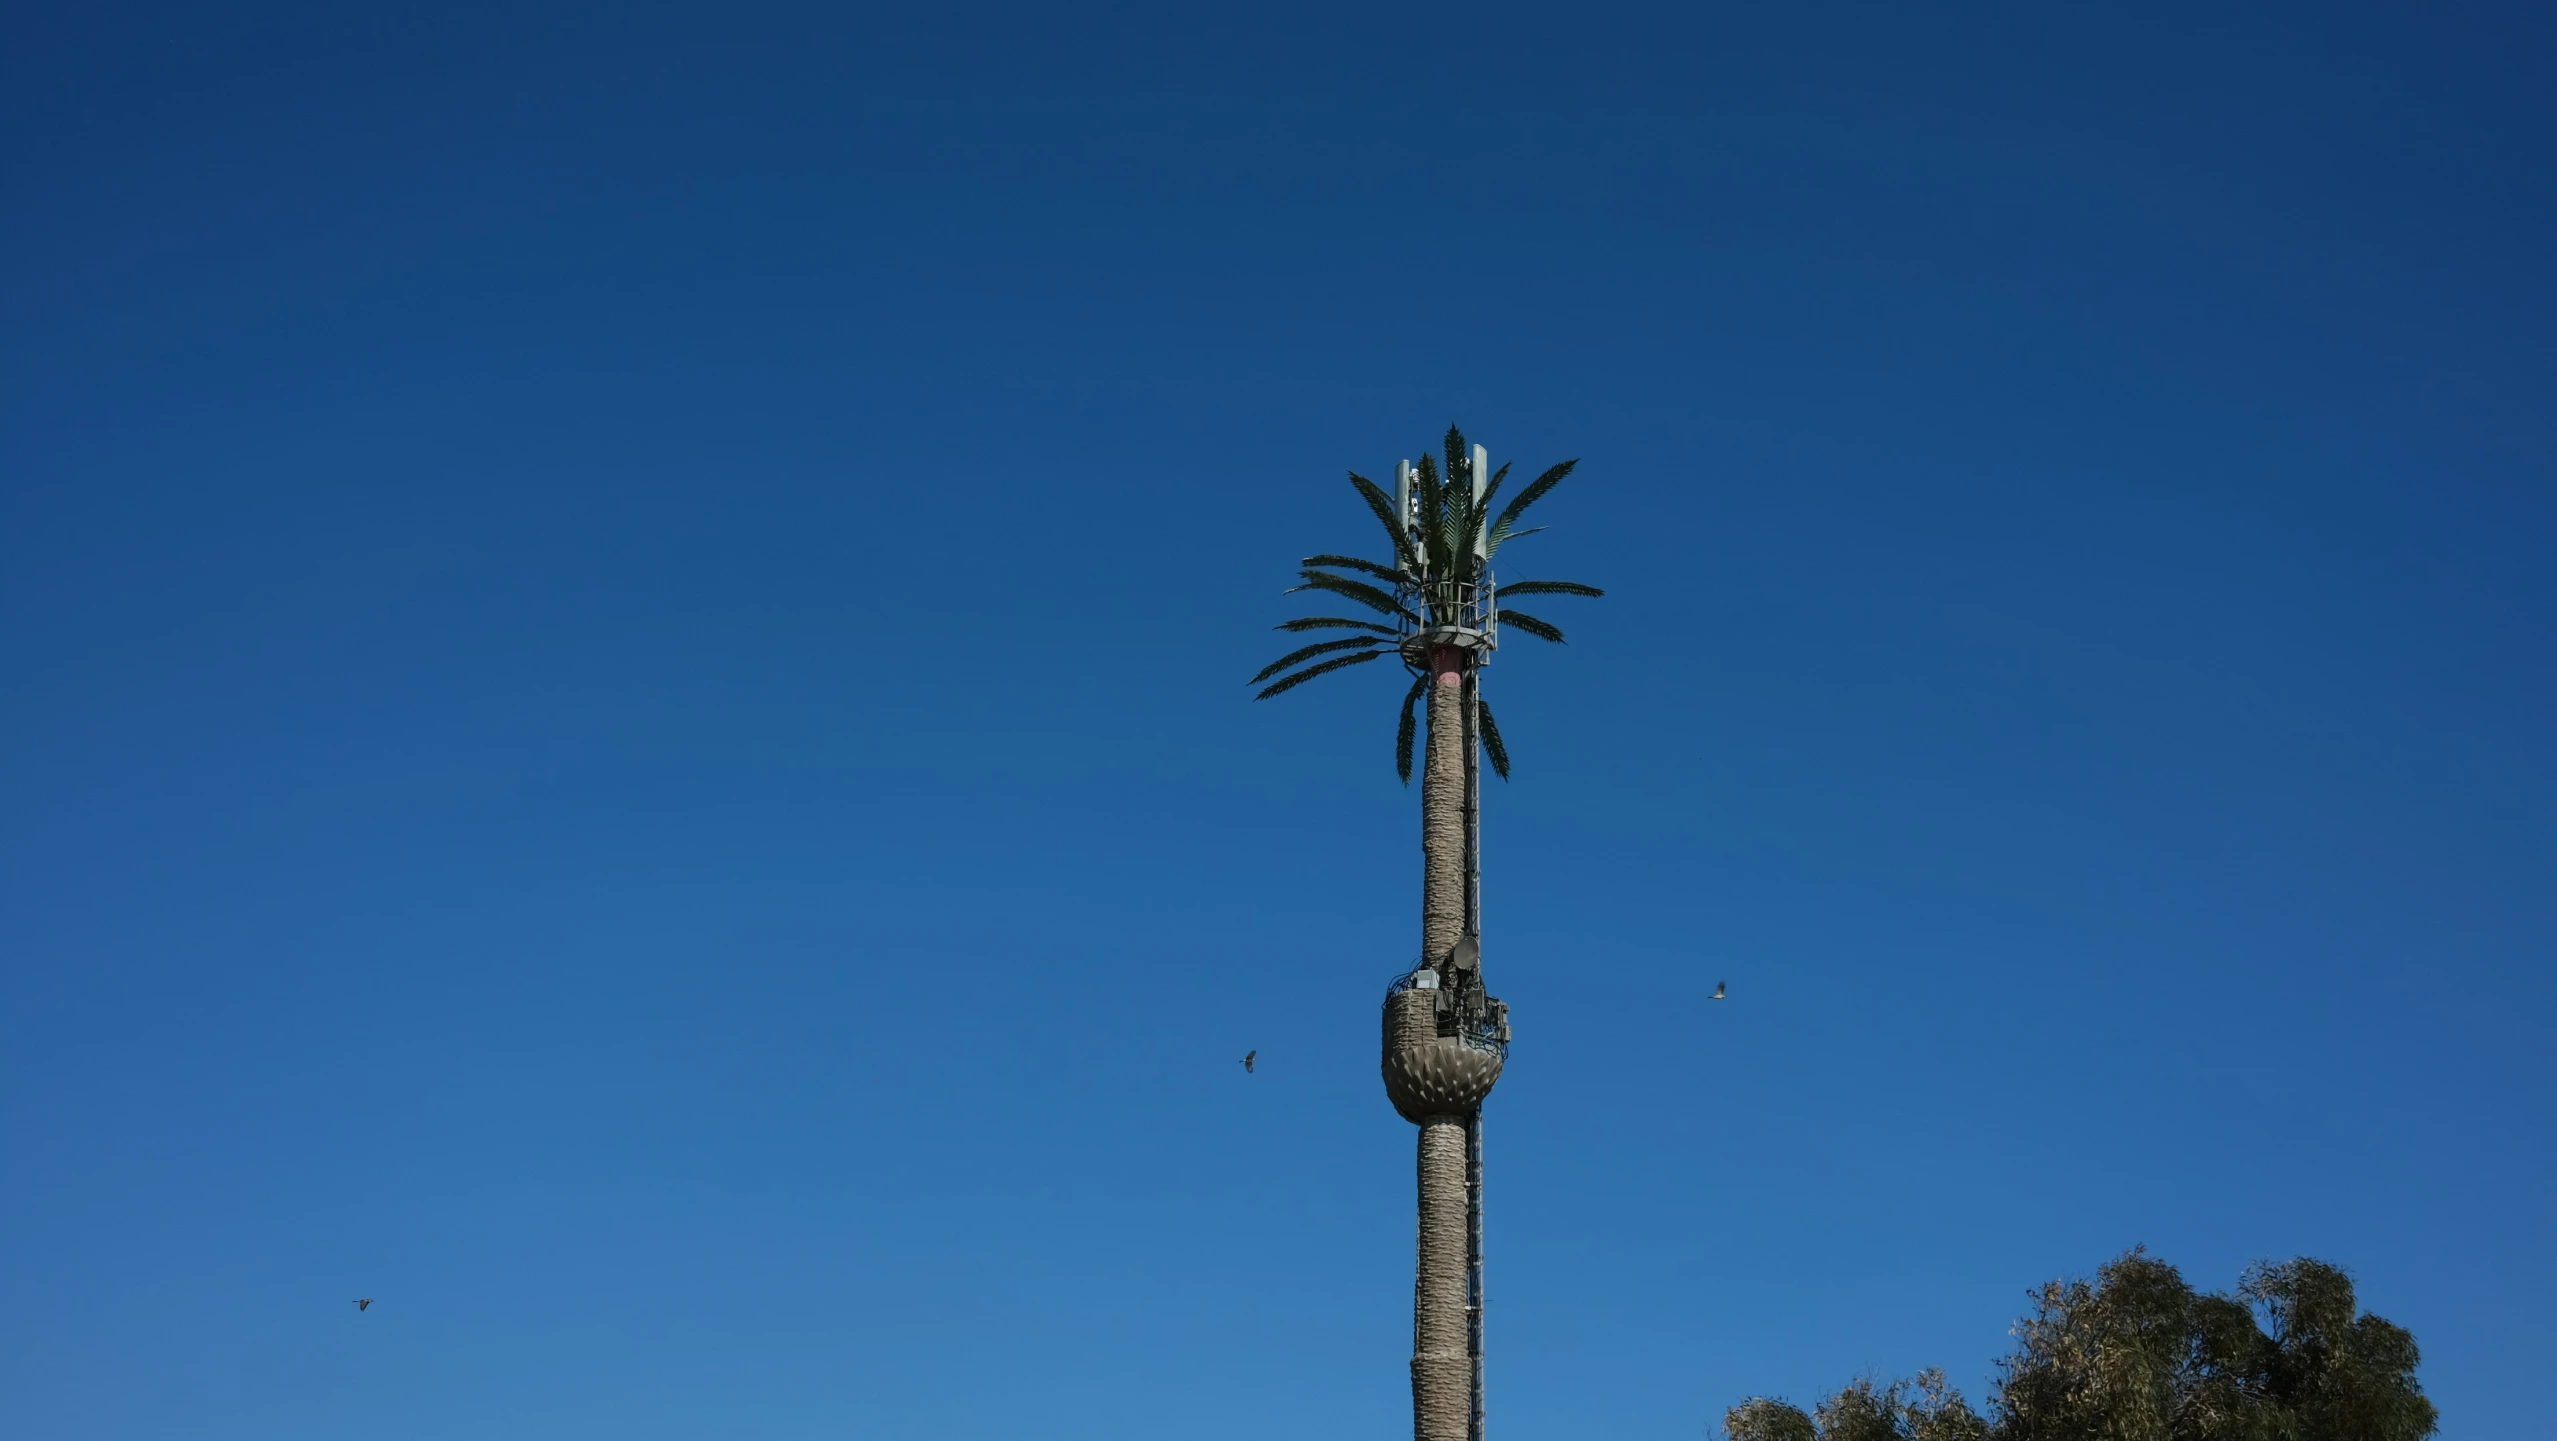 a palm tree on a clear day with blue sky